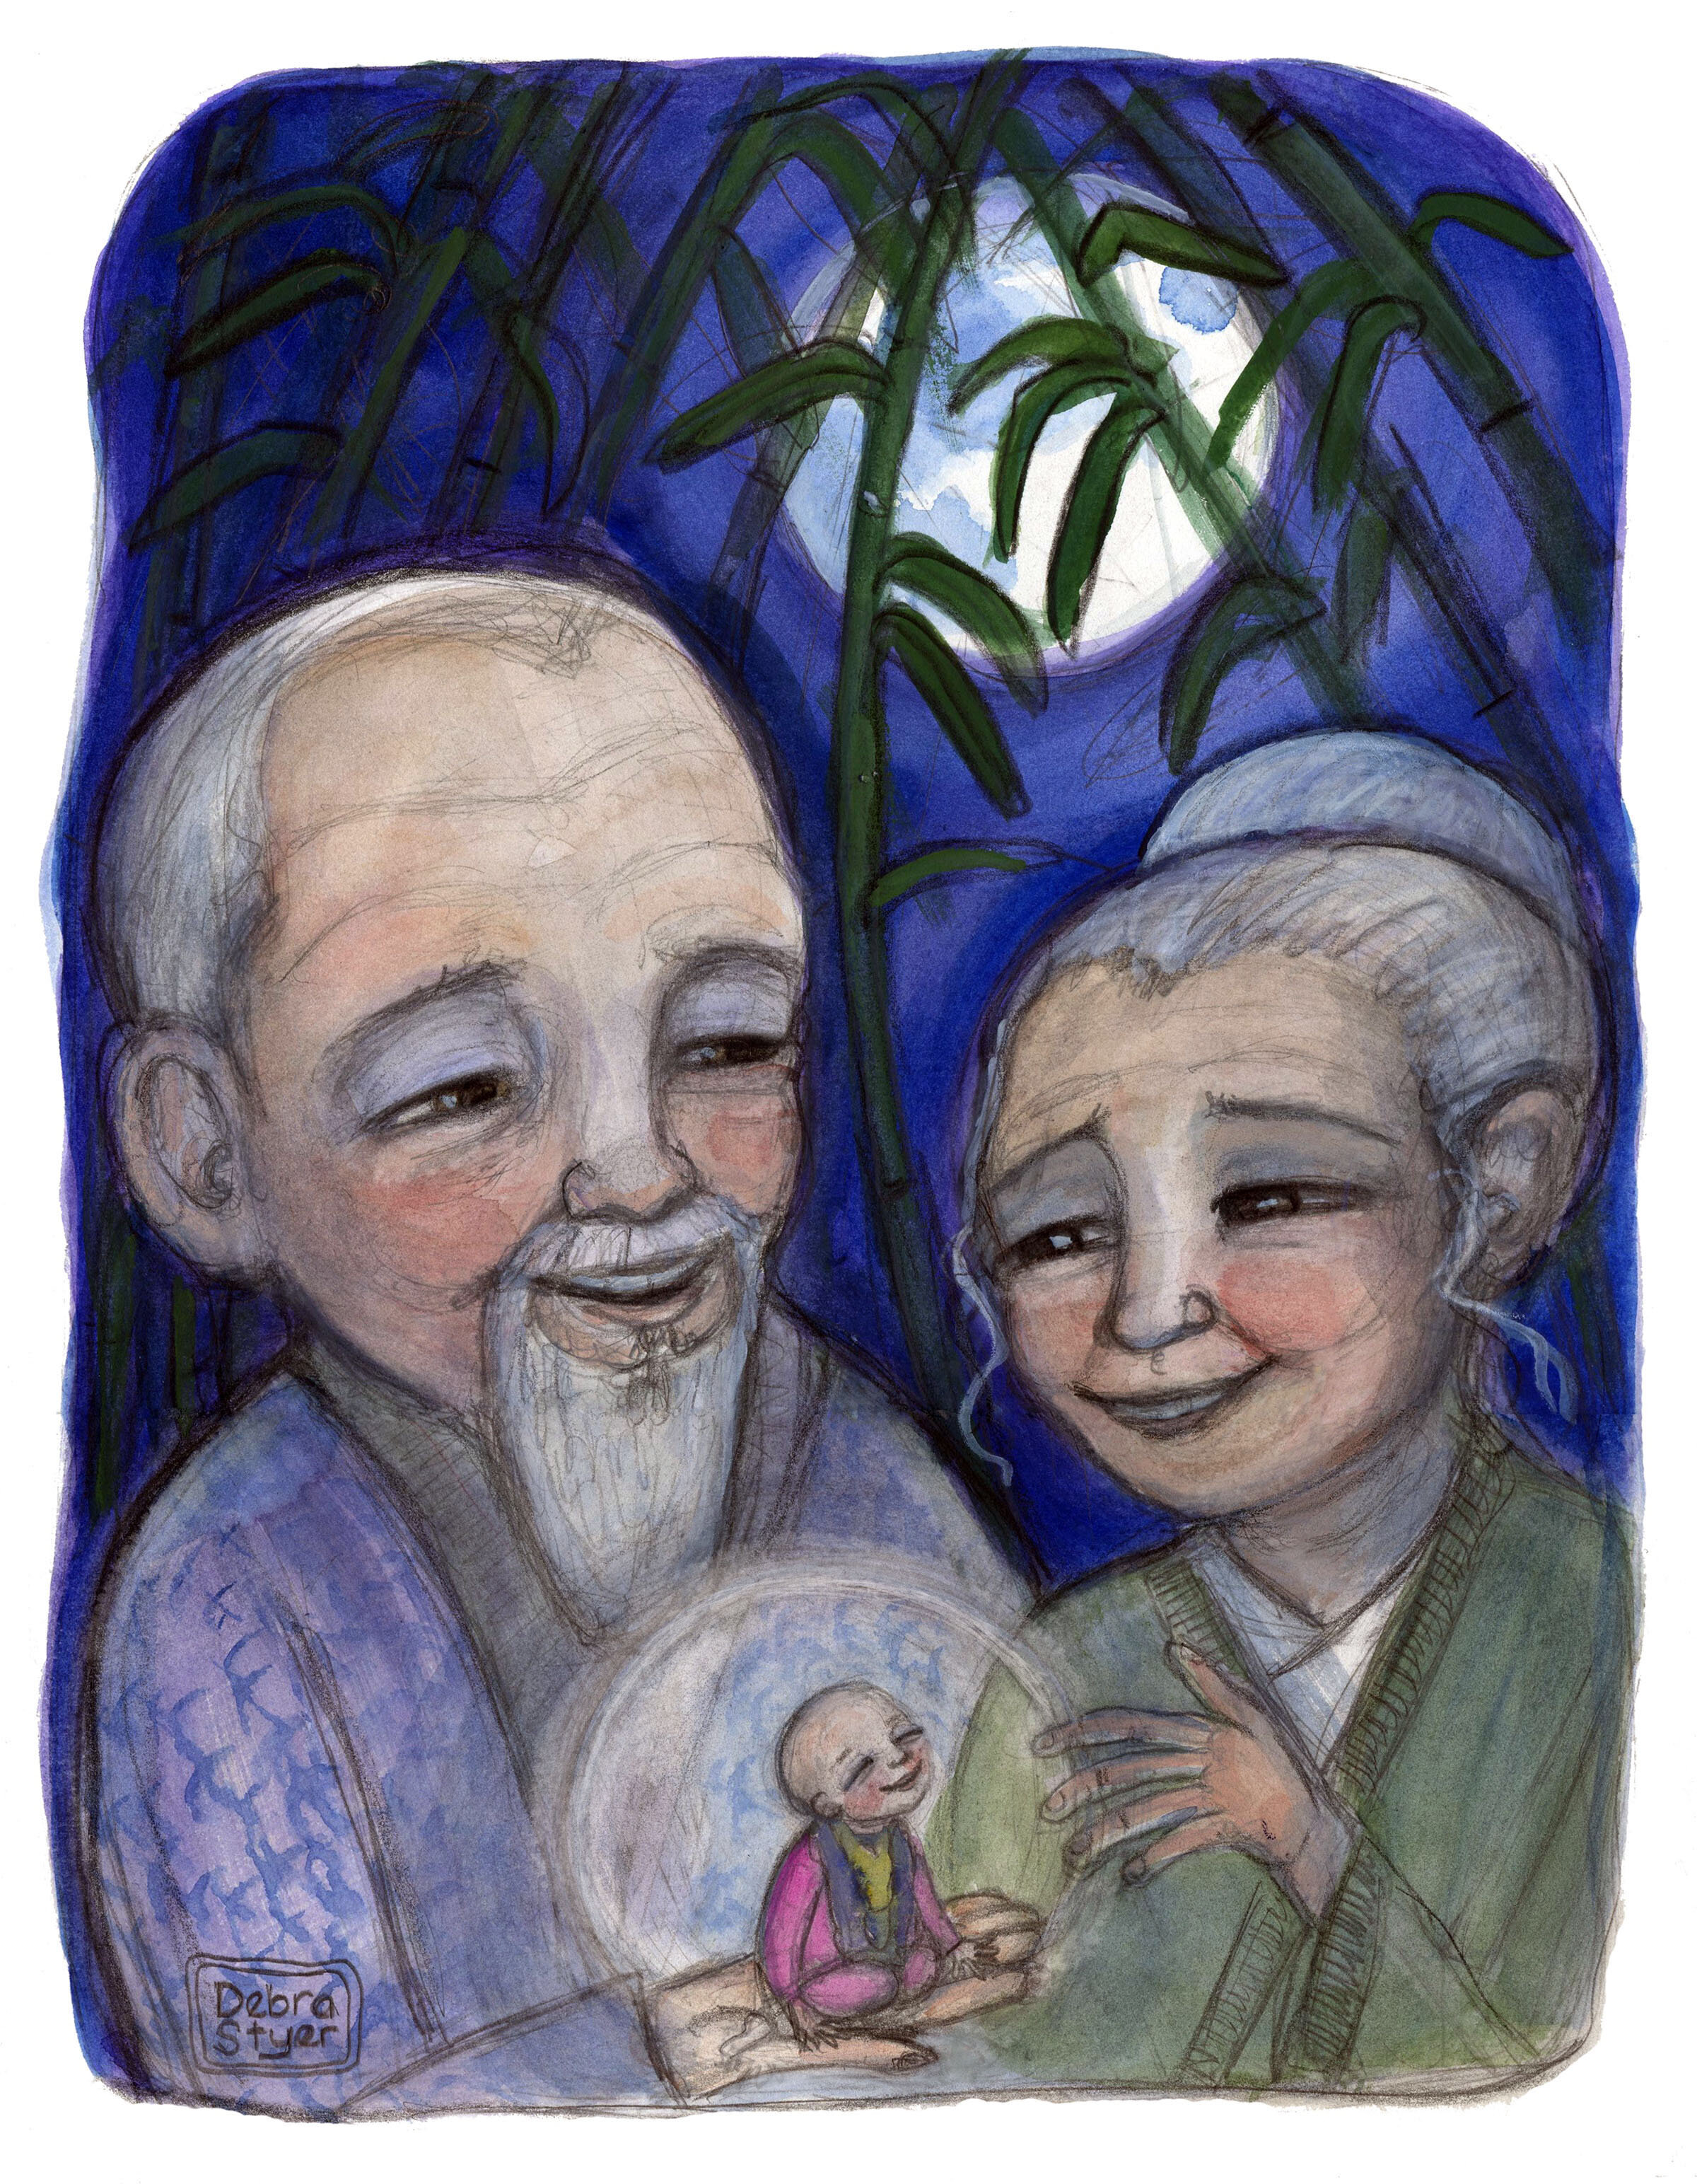 Birth (The Bamboo Cutter and the Moon Child)